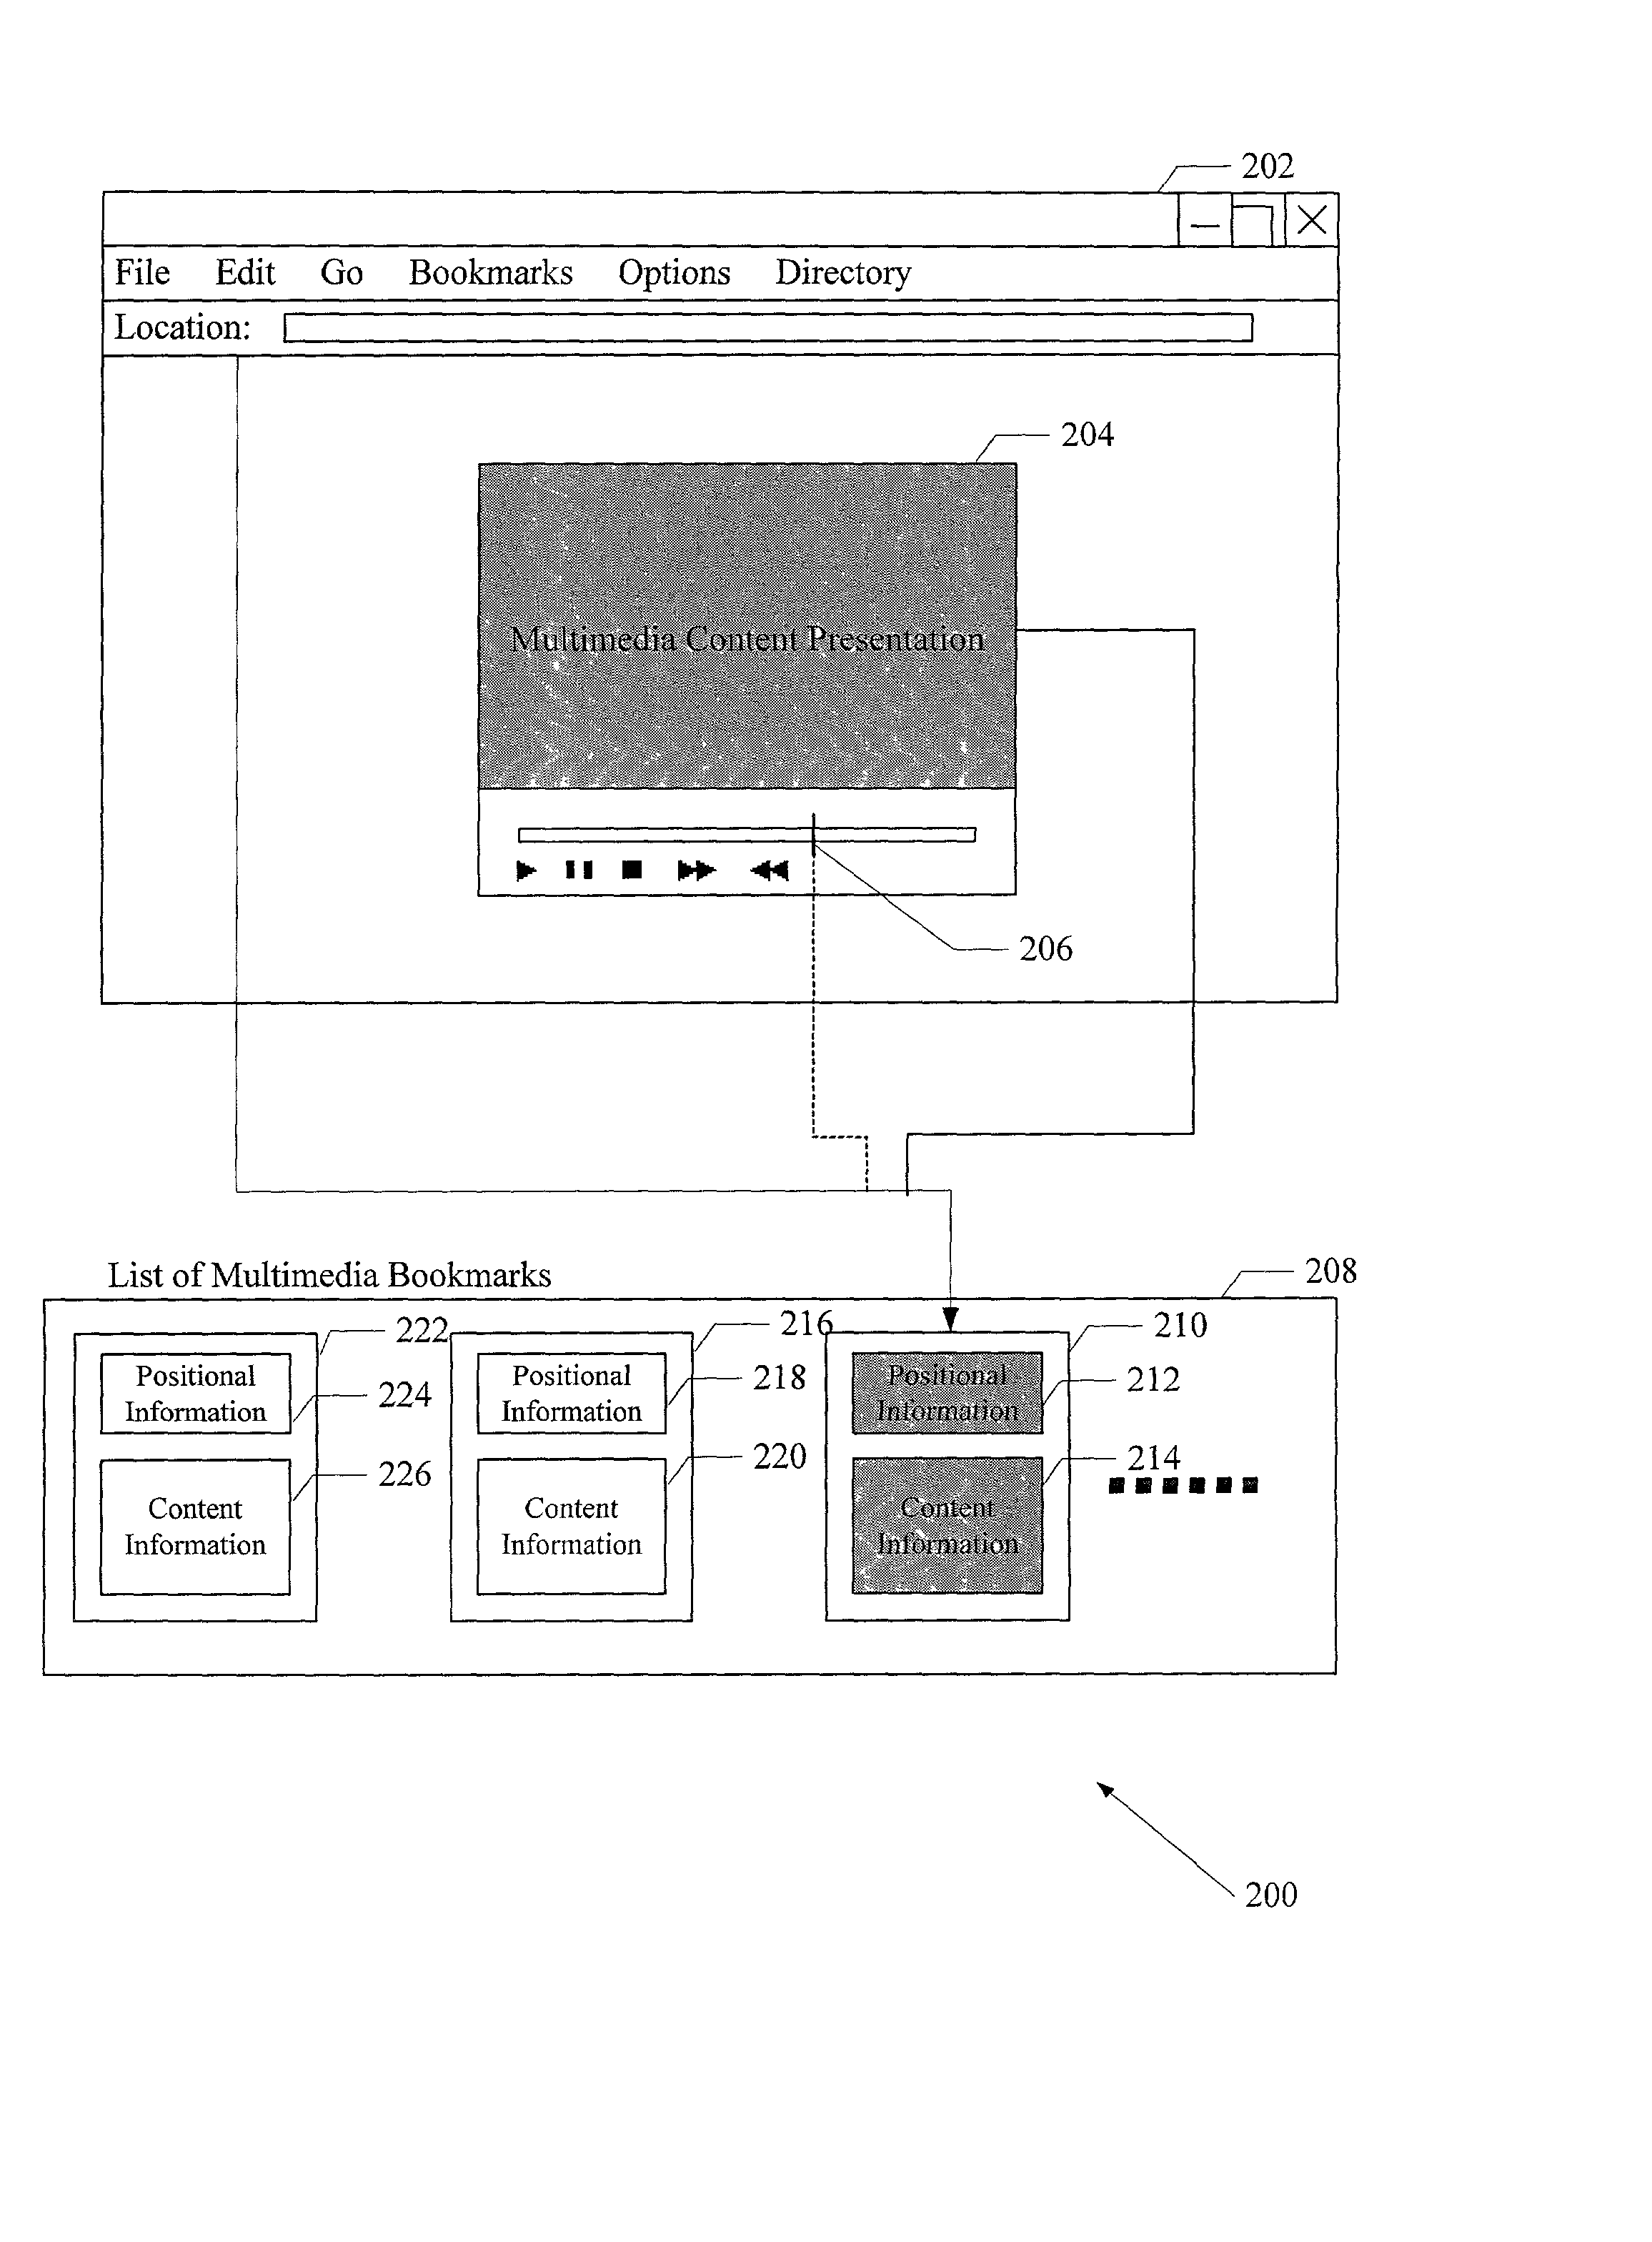 System and method for indexing, searching, identifying, and editing portions of electronic multimedia files